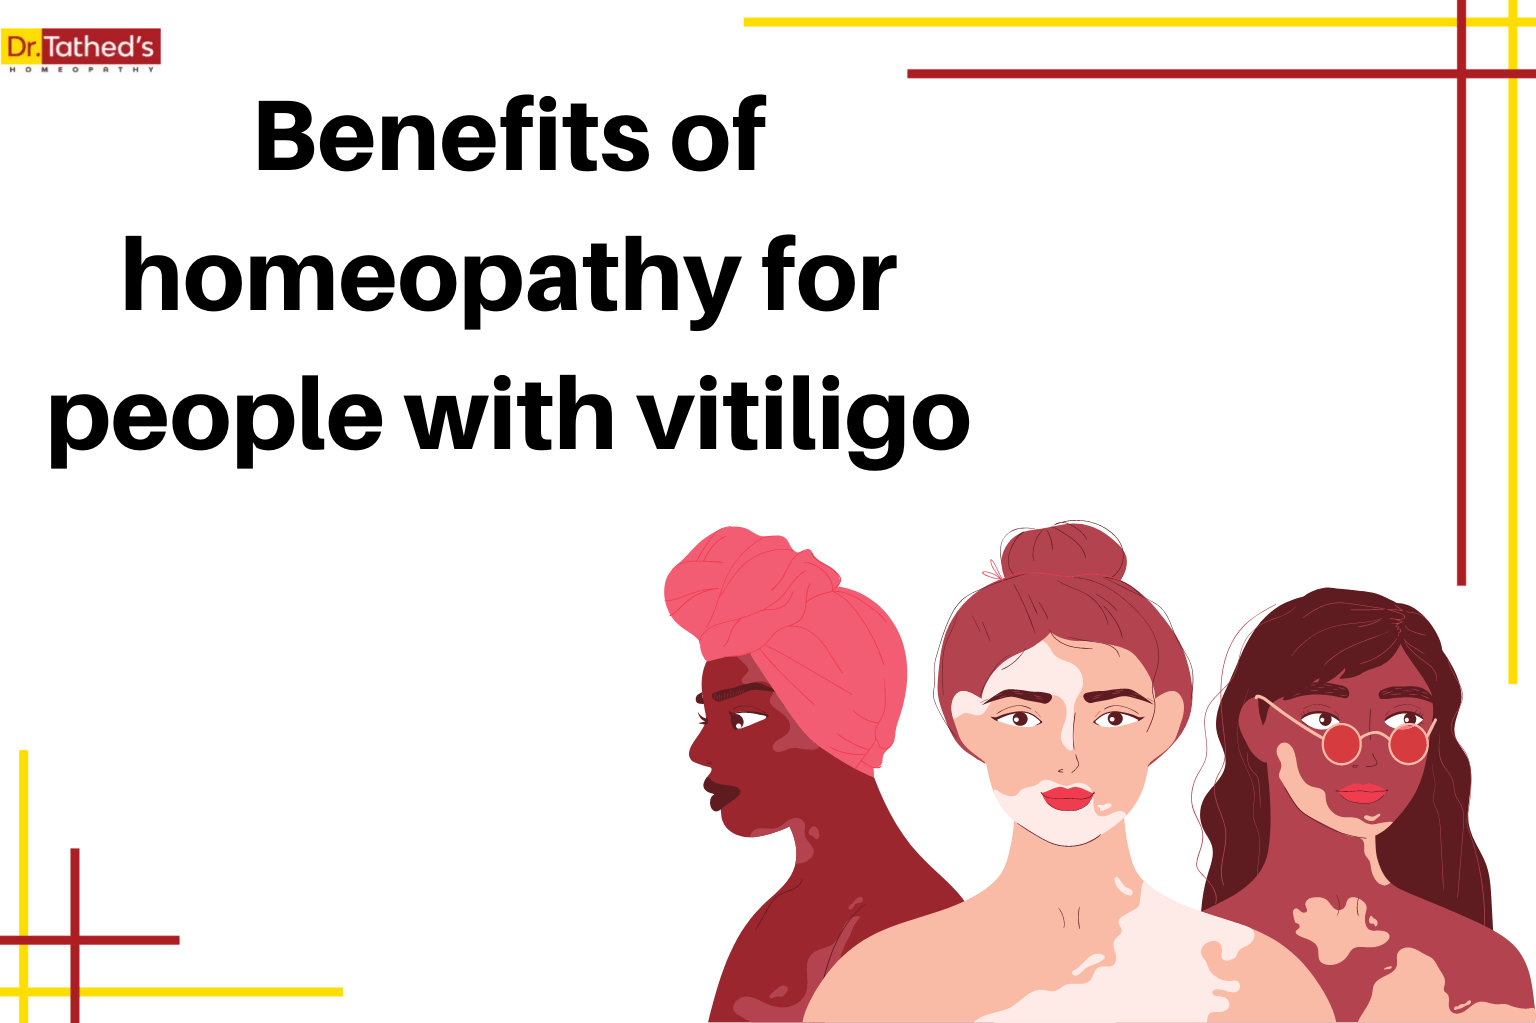 Benefits of homeopathy for people with vitiligo